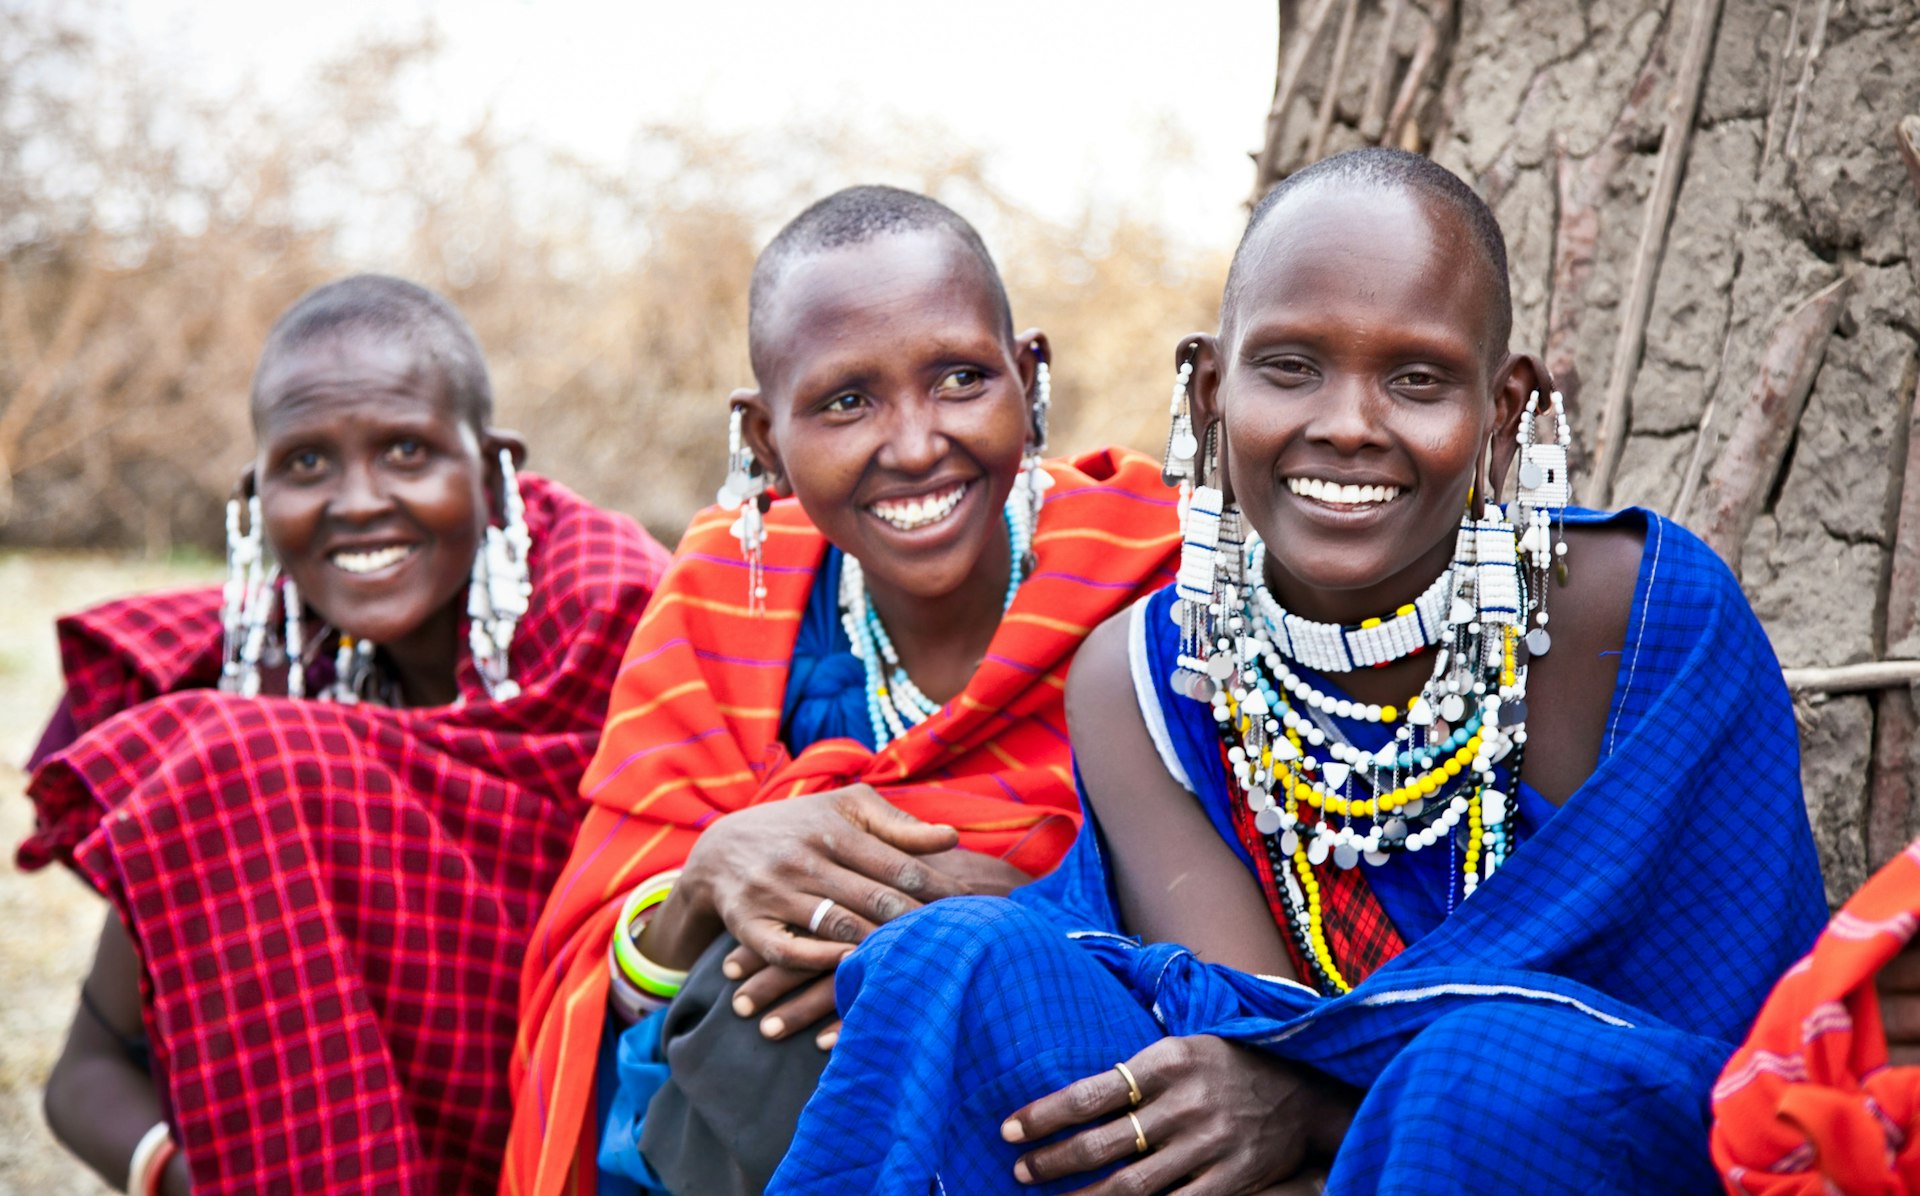 Three Maasai women with traditional robes and ornaments of blue, red and pink stripes at the Serengeti National Park